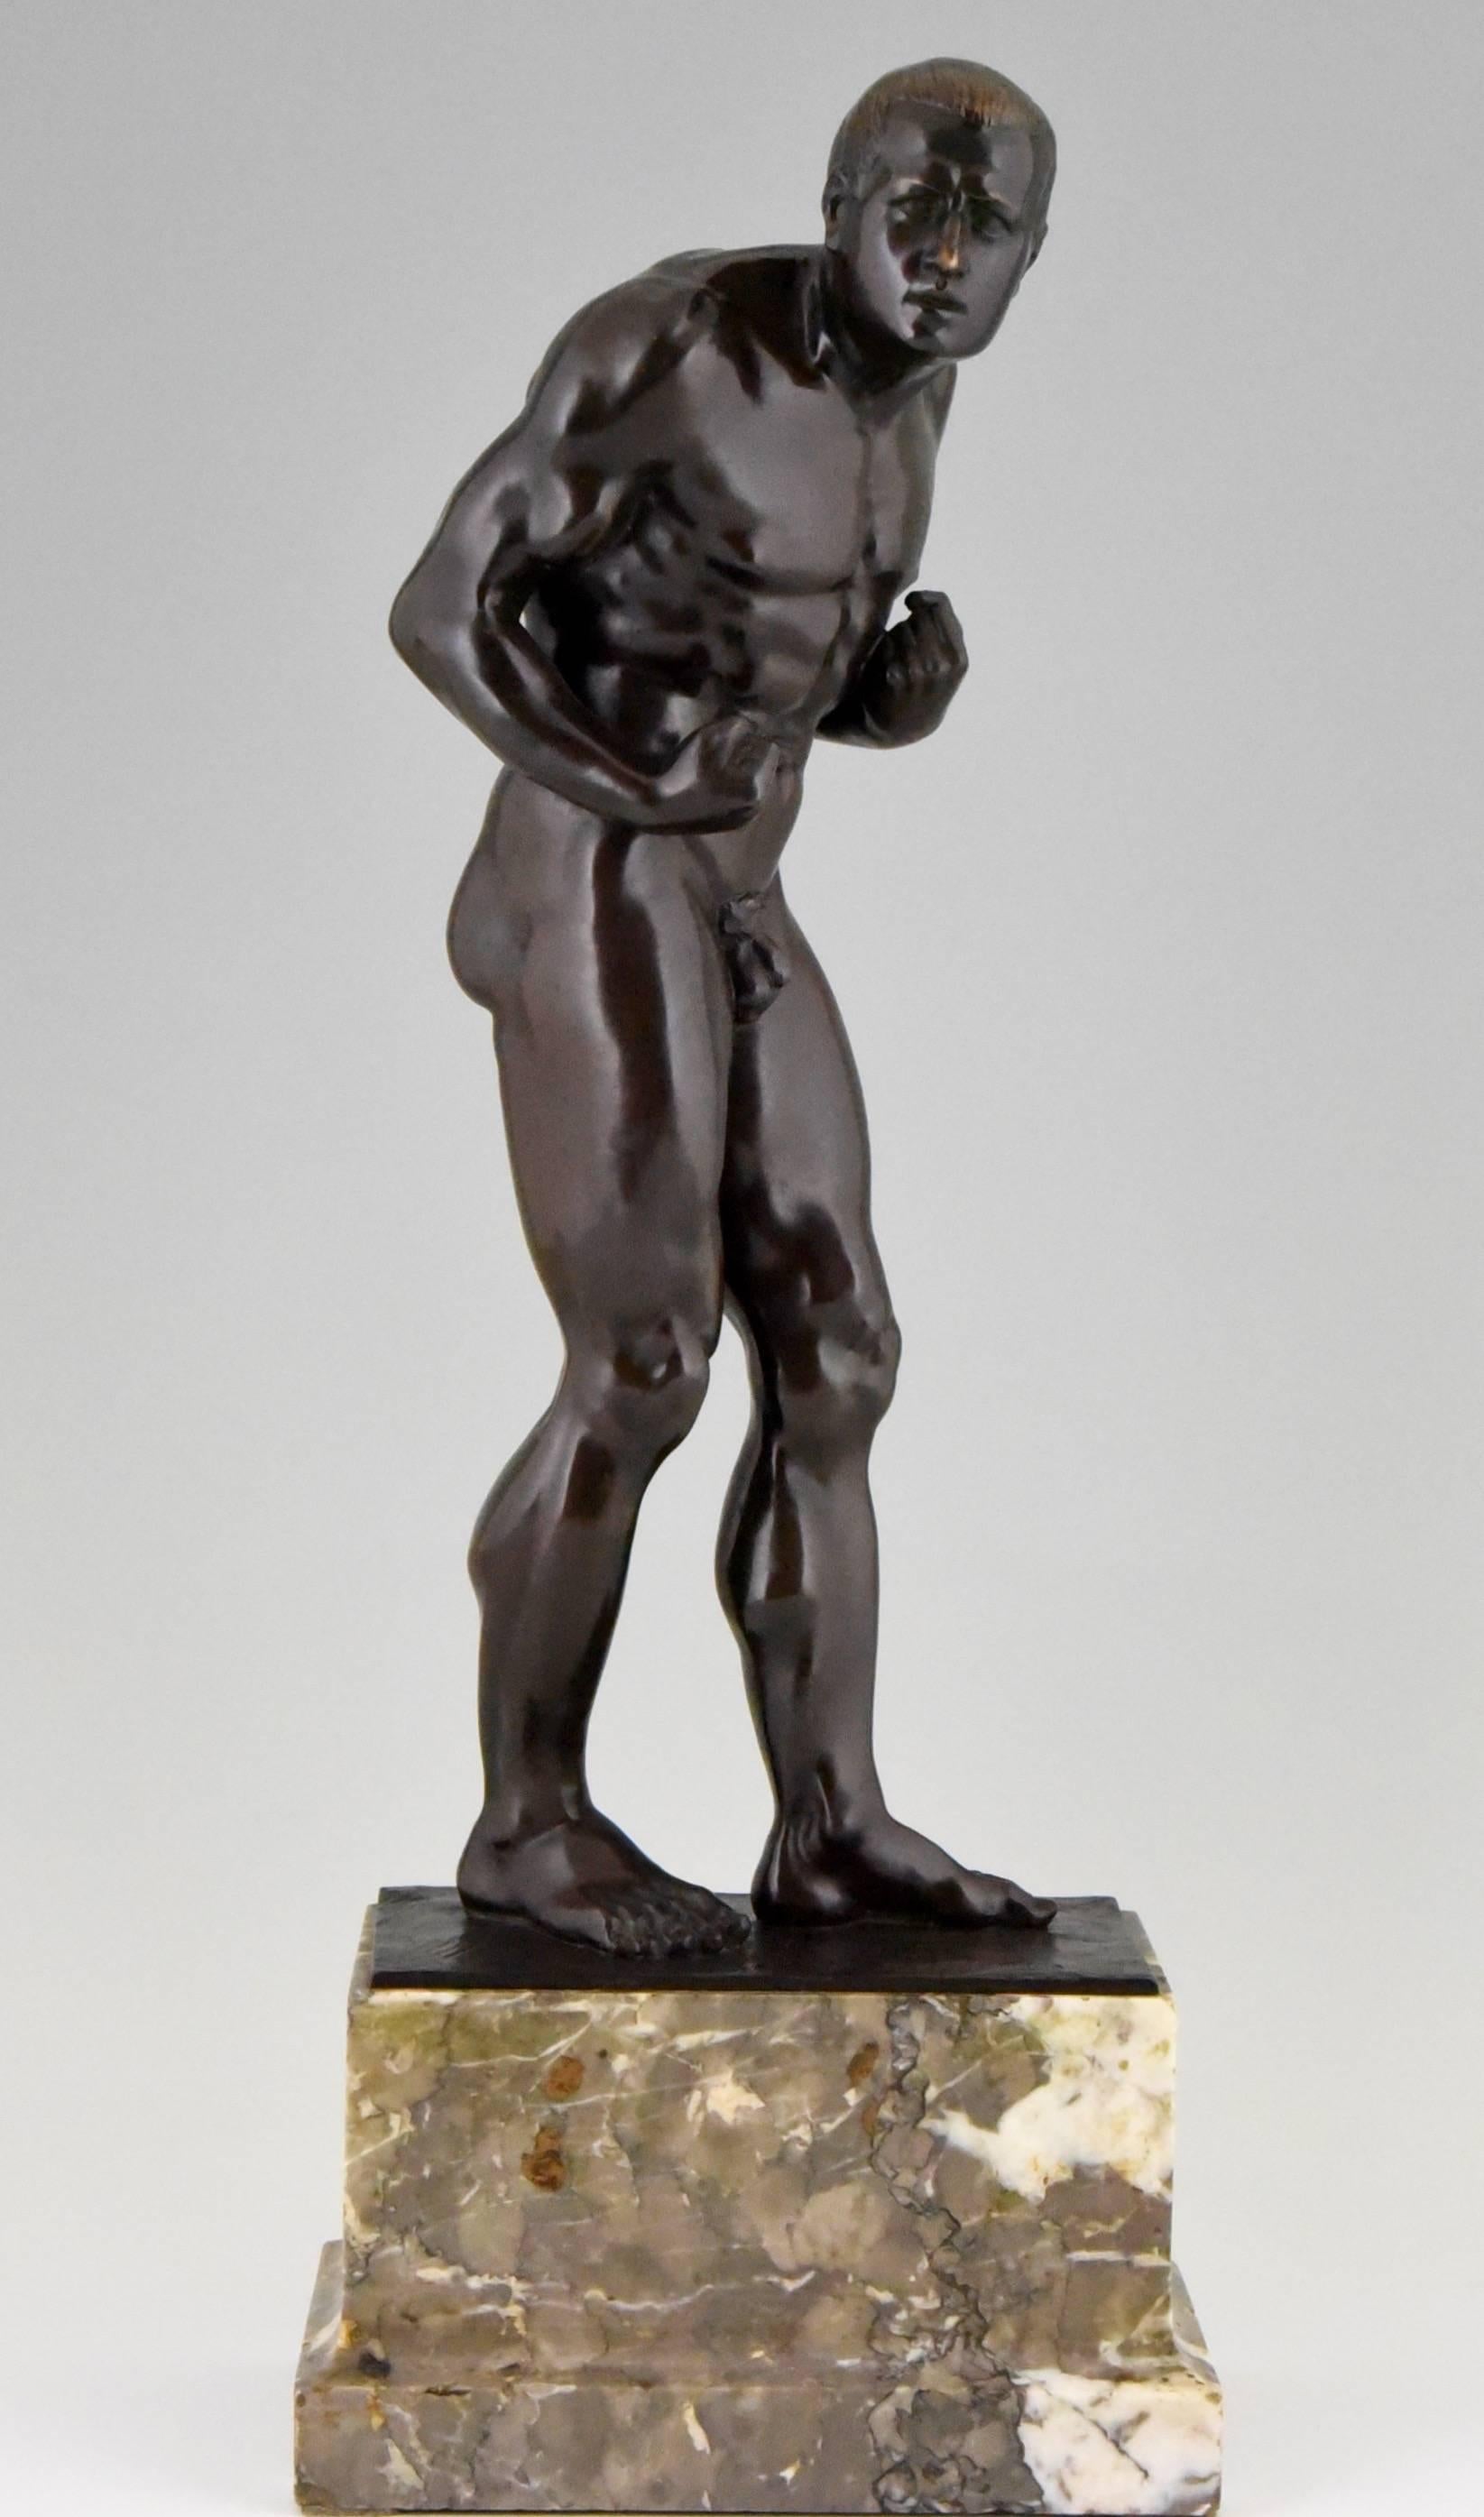 The boxer by Otto Feist, born in Germany 1872. 
Signature/ Marks:   O. Feist.  1906  and Foundry mark. 
	
Material: Bronze with very dark brown patina.  Marble base. 	
Origin:  Germany.			

Size:			 
H. 52 cm. x L. 19.5 cm. x W. 11.6 cm.